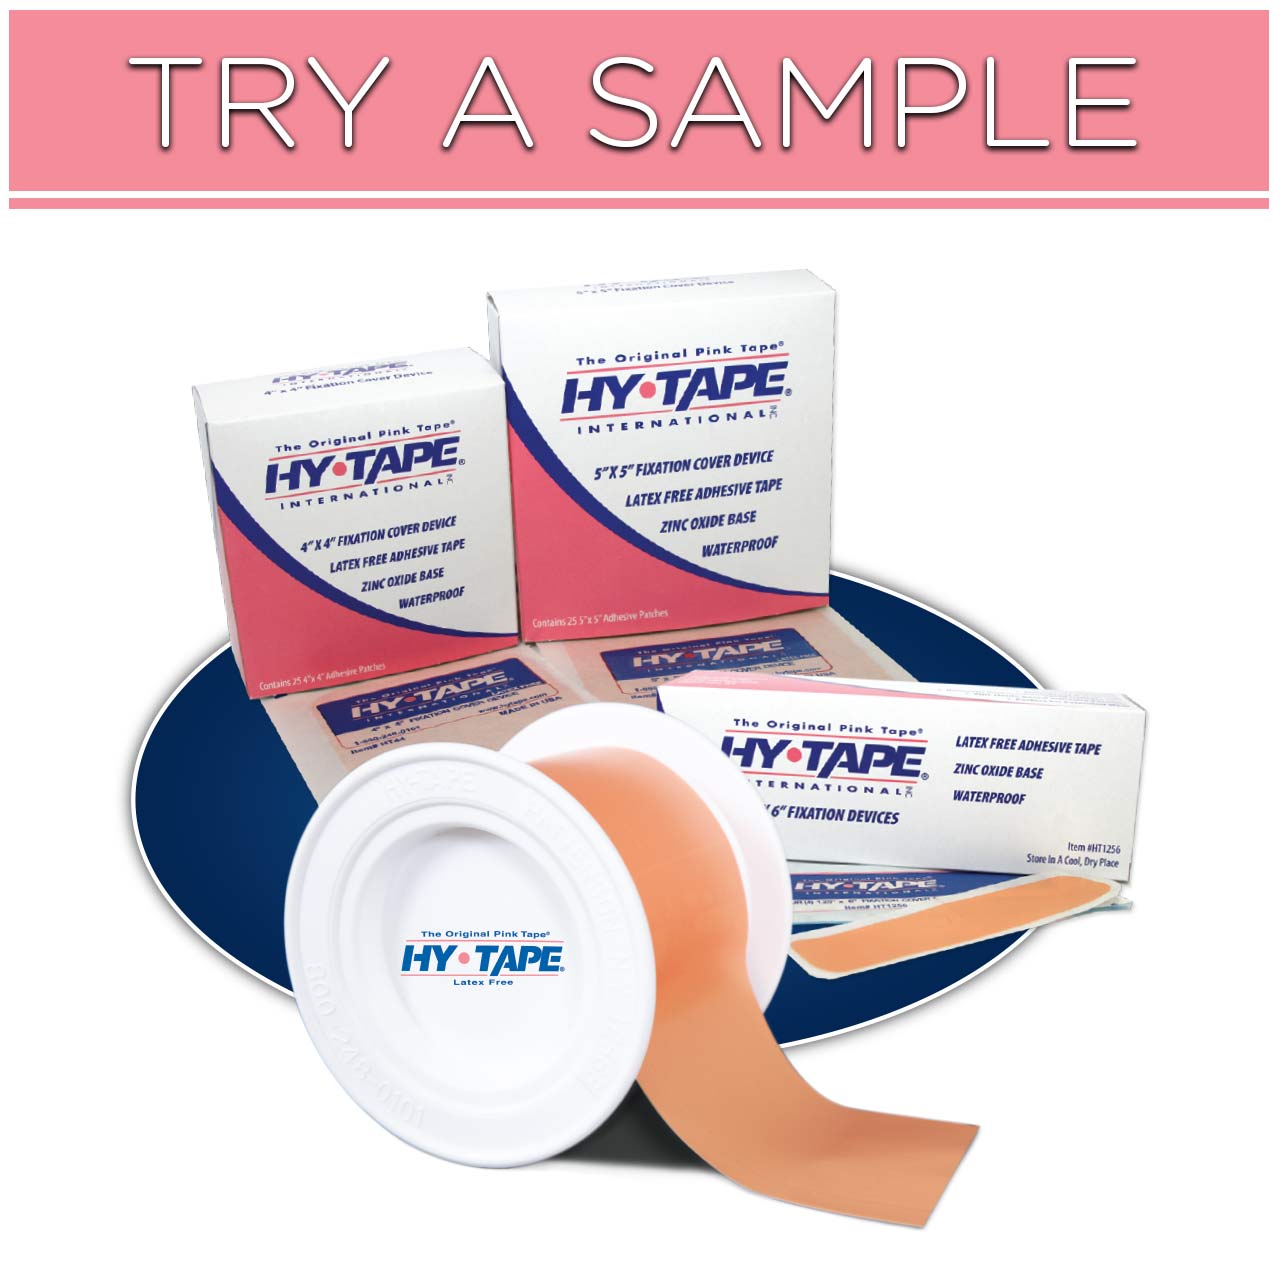 Hy-Tape Adhesive Patches - Hy-Tape International, Inc.